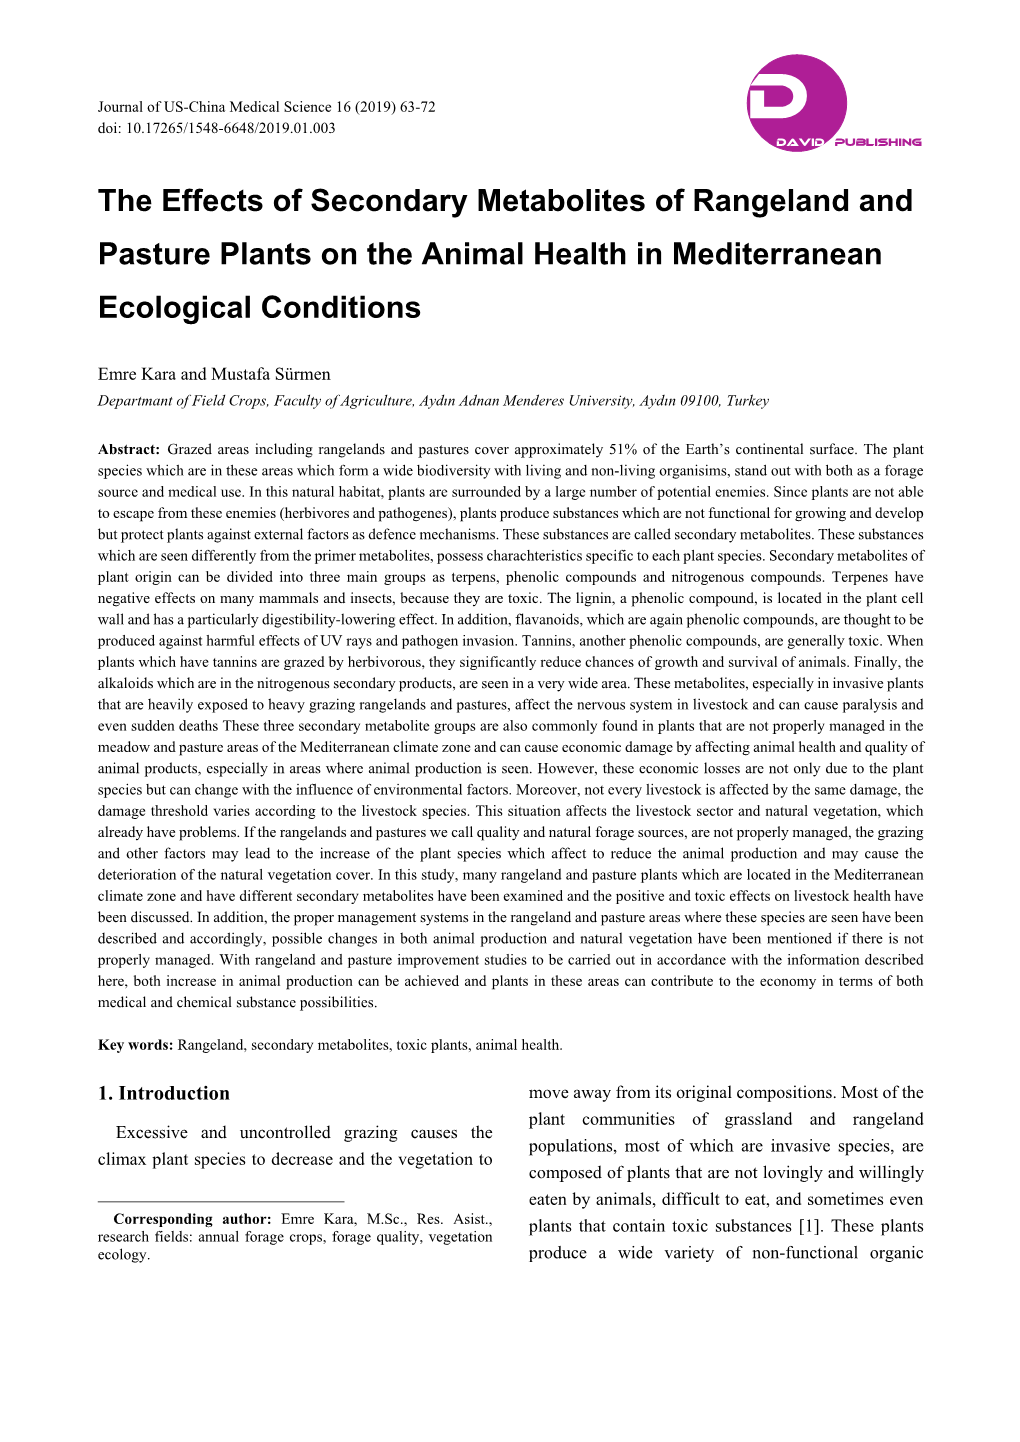 The Effects of Secondary Metabolites of Rangeland and Pasture Plants on the Animal Health in Mediterranean Ecological Conditions